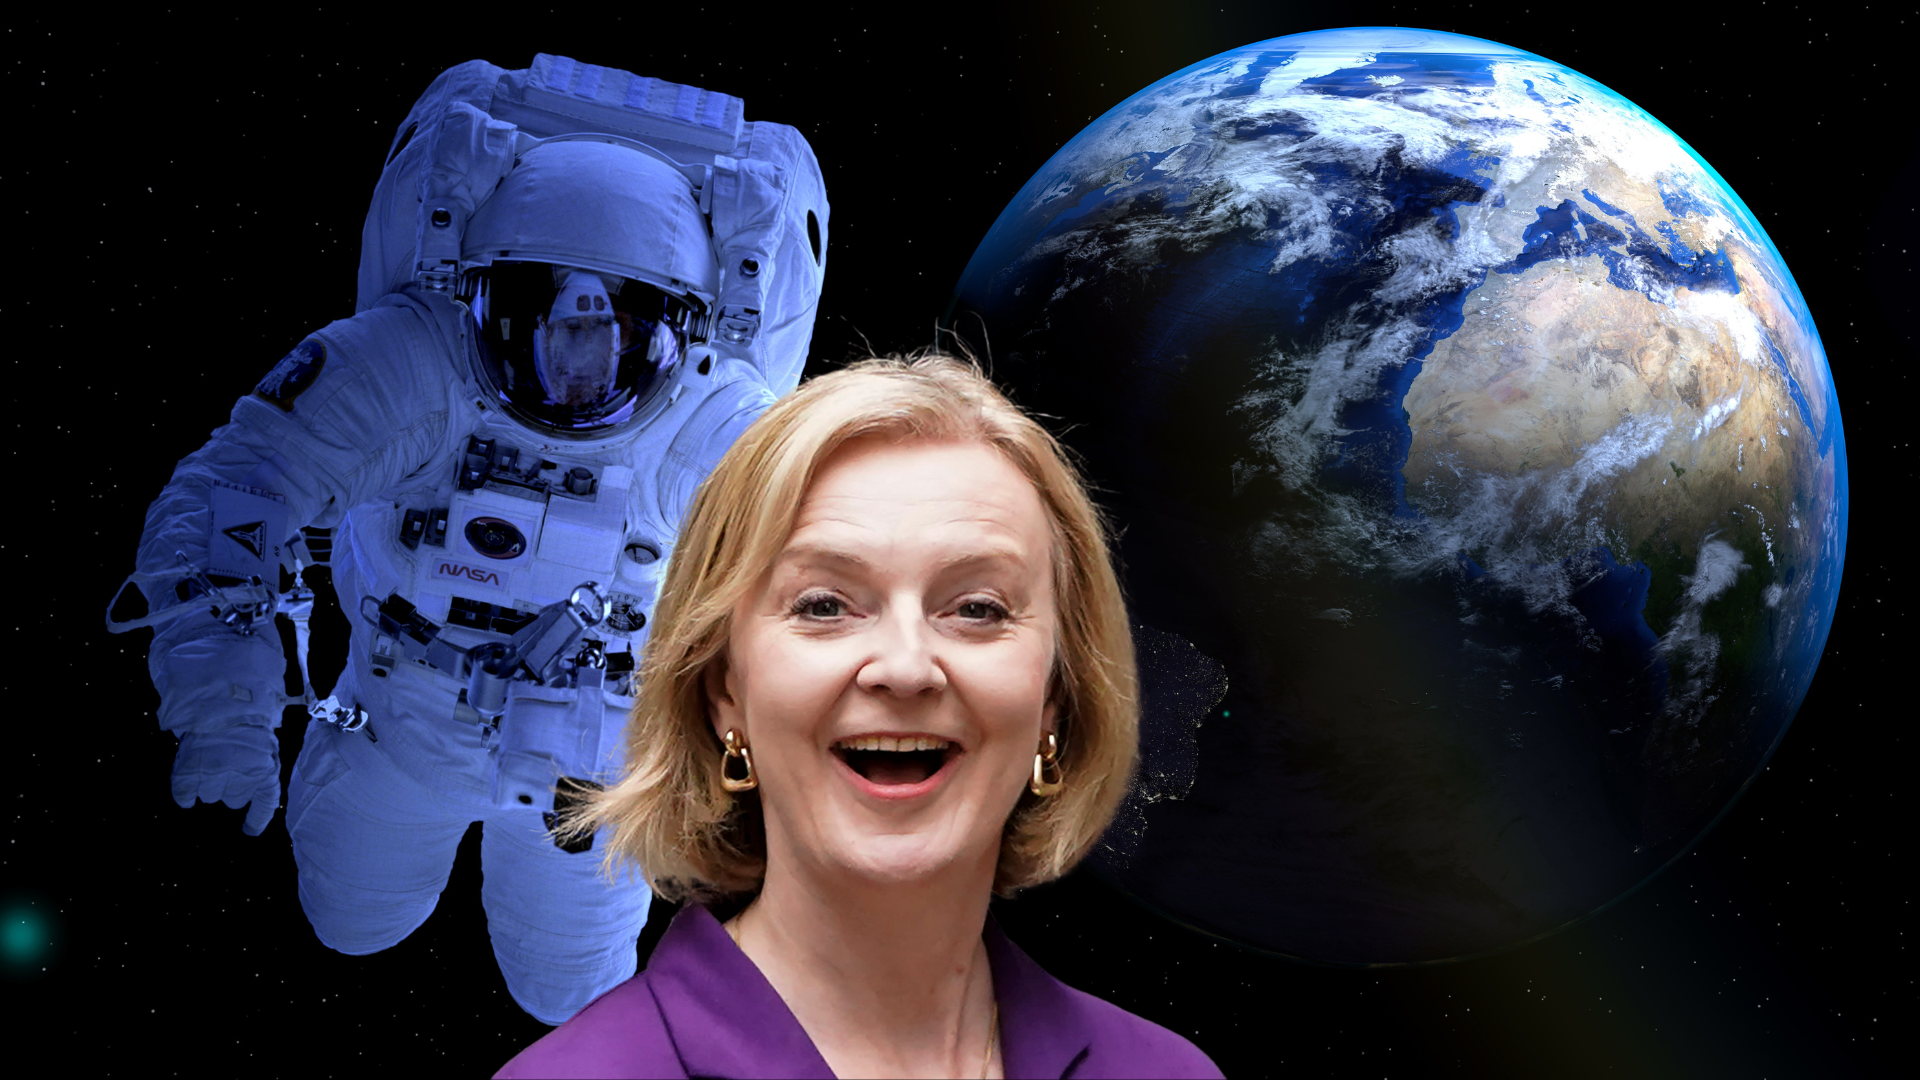 Will Liz Truss get the UK back on track with EU space and scientific research programmes?